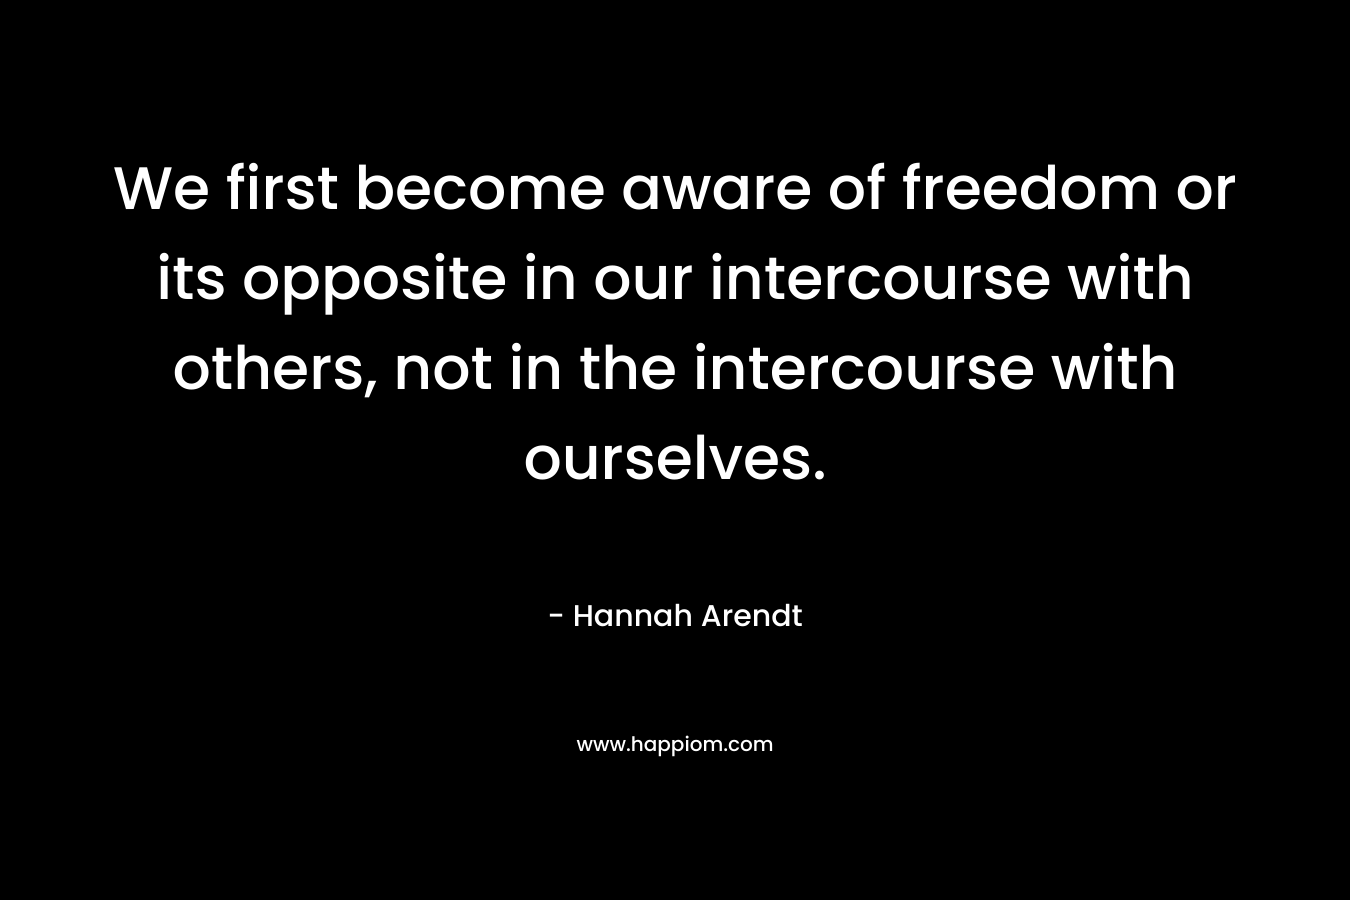 We first become aware of freedom or its opposite in our intercourse with others, not in the intercourse with ourselves. – Hannah Arendt